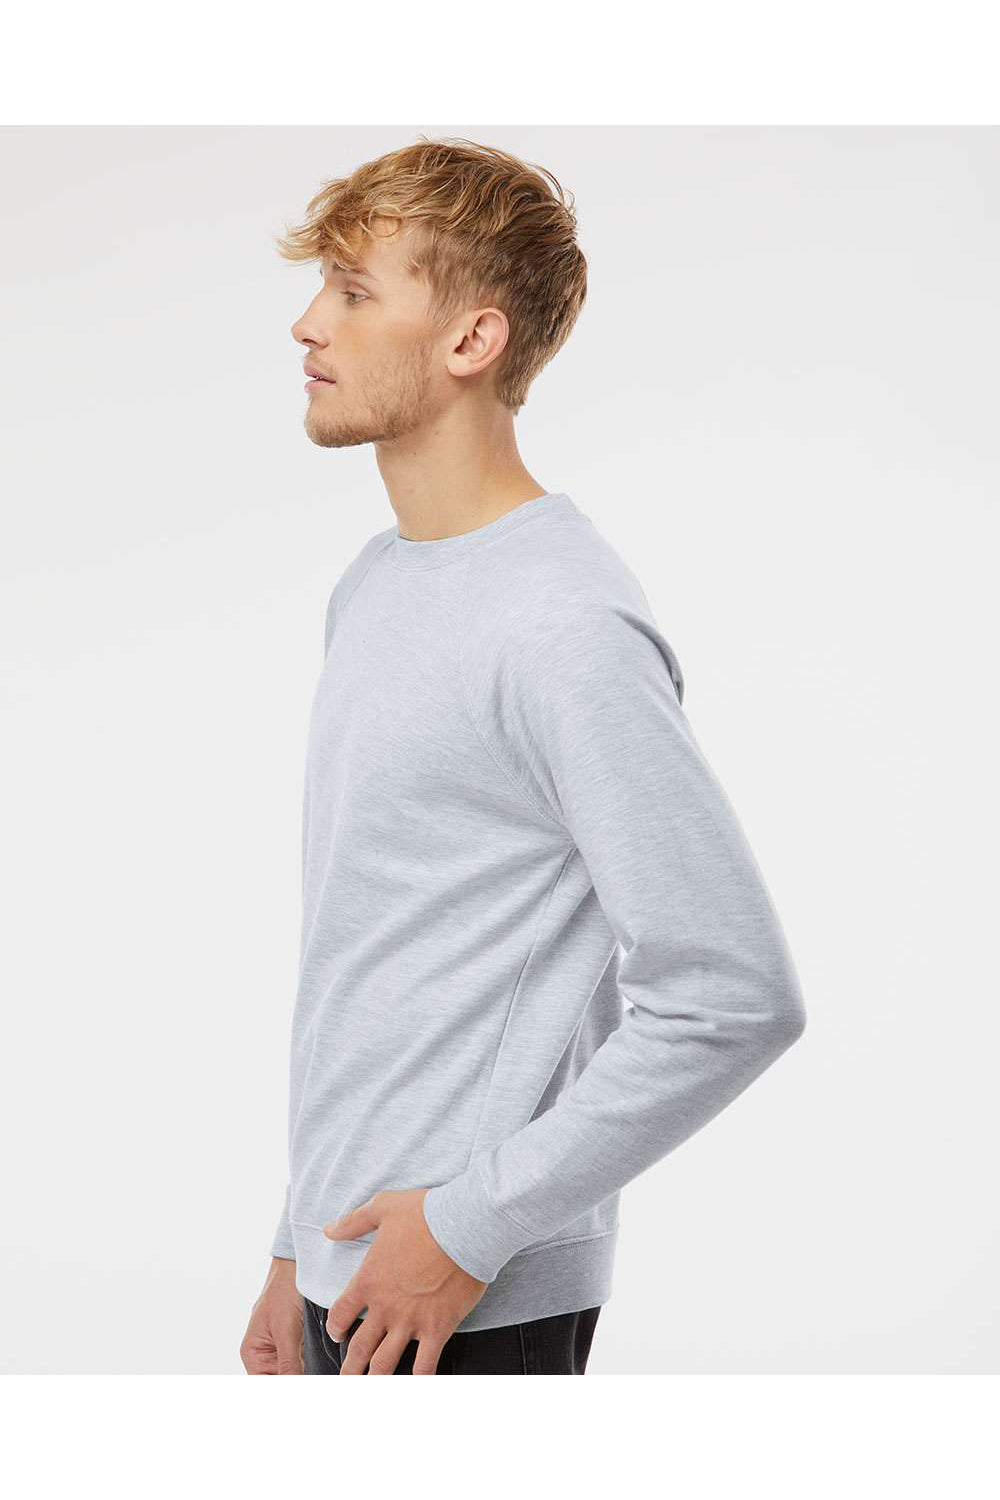 Independent Trading Co. SS1000C Mens Icon Loopback Terry Crewneck Sweatshirt Heather Grey Model Side